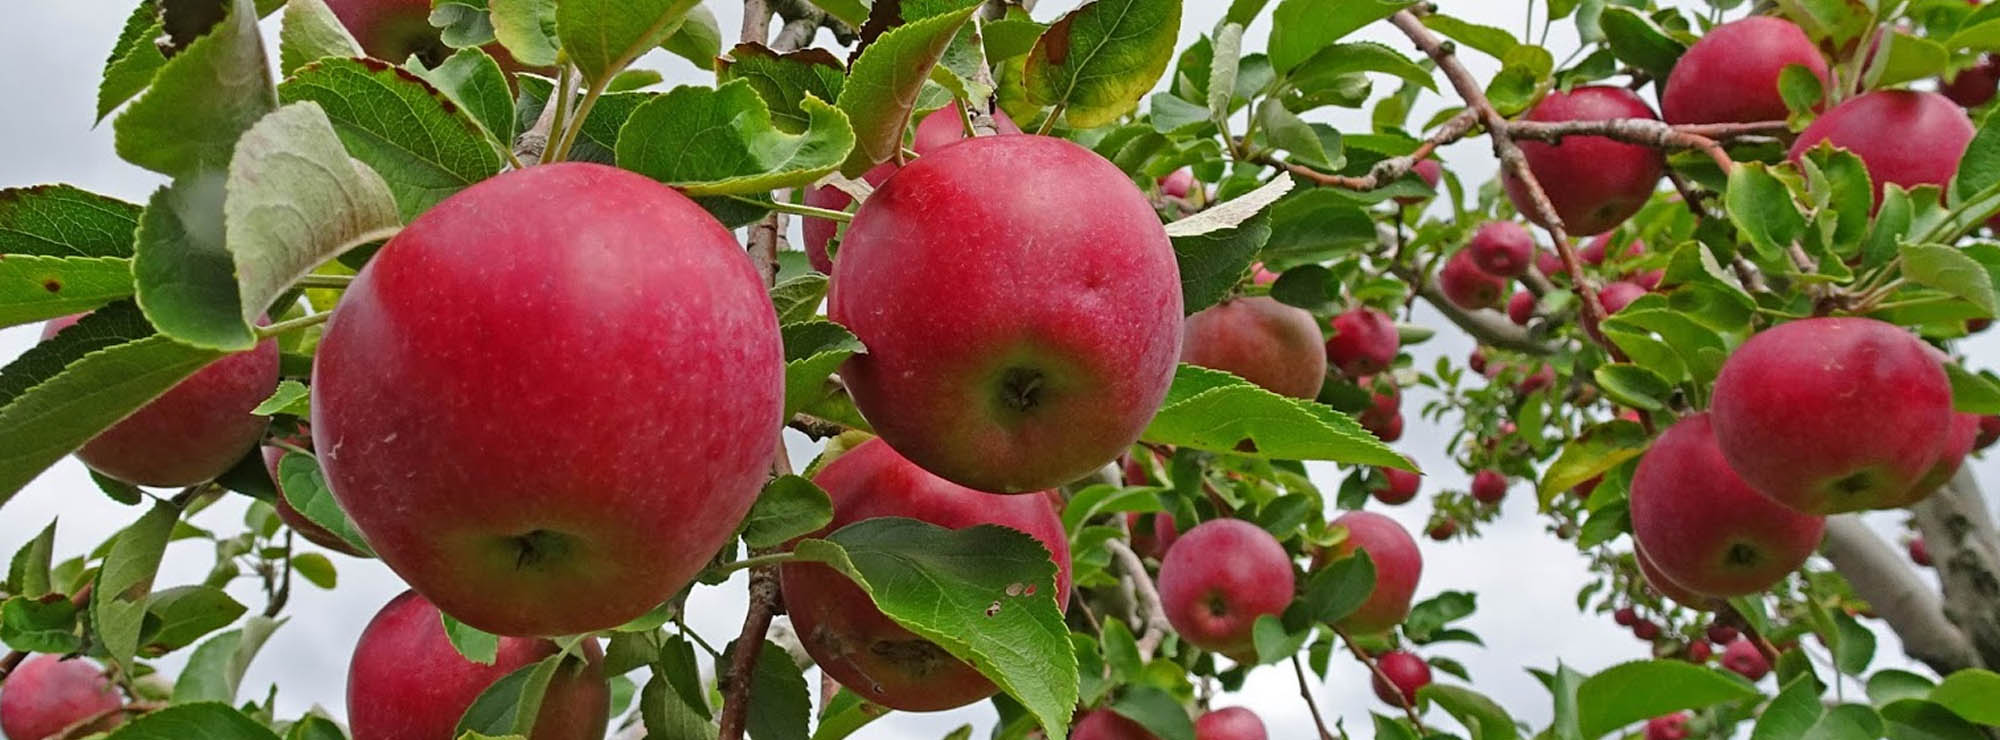 Meet the new harvesting robots that can pick 10,000 apples an hour ...